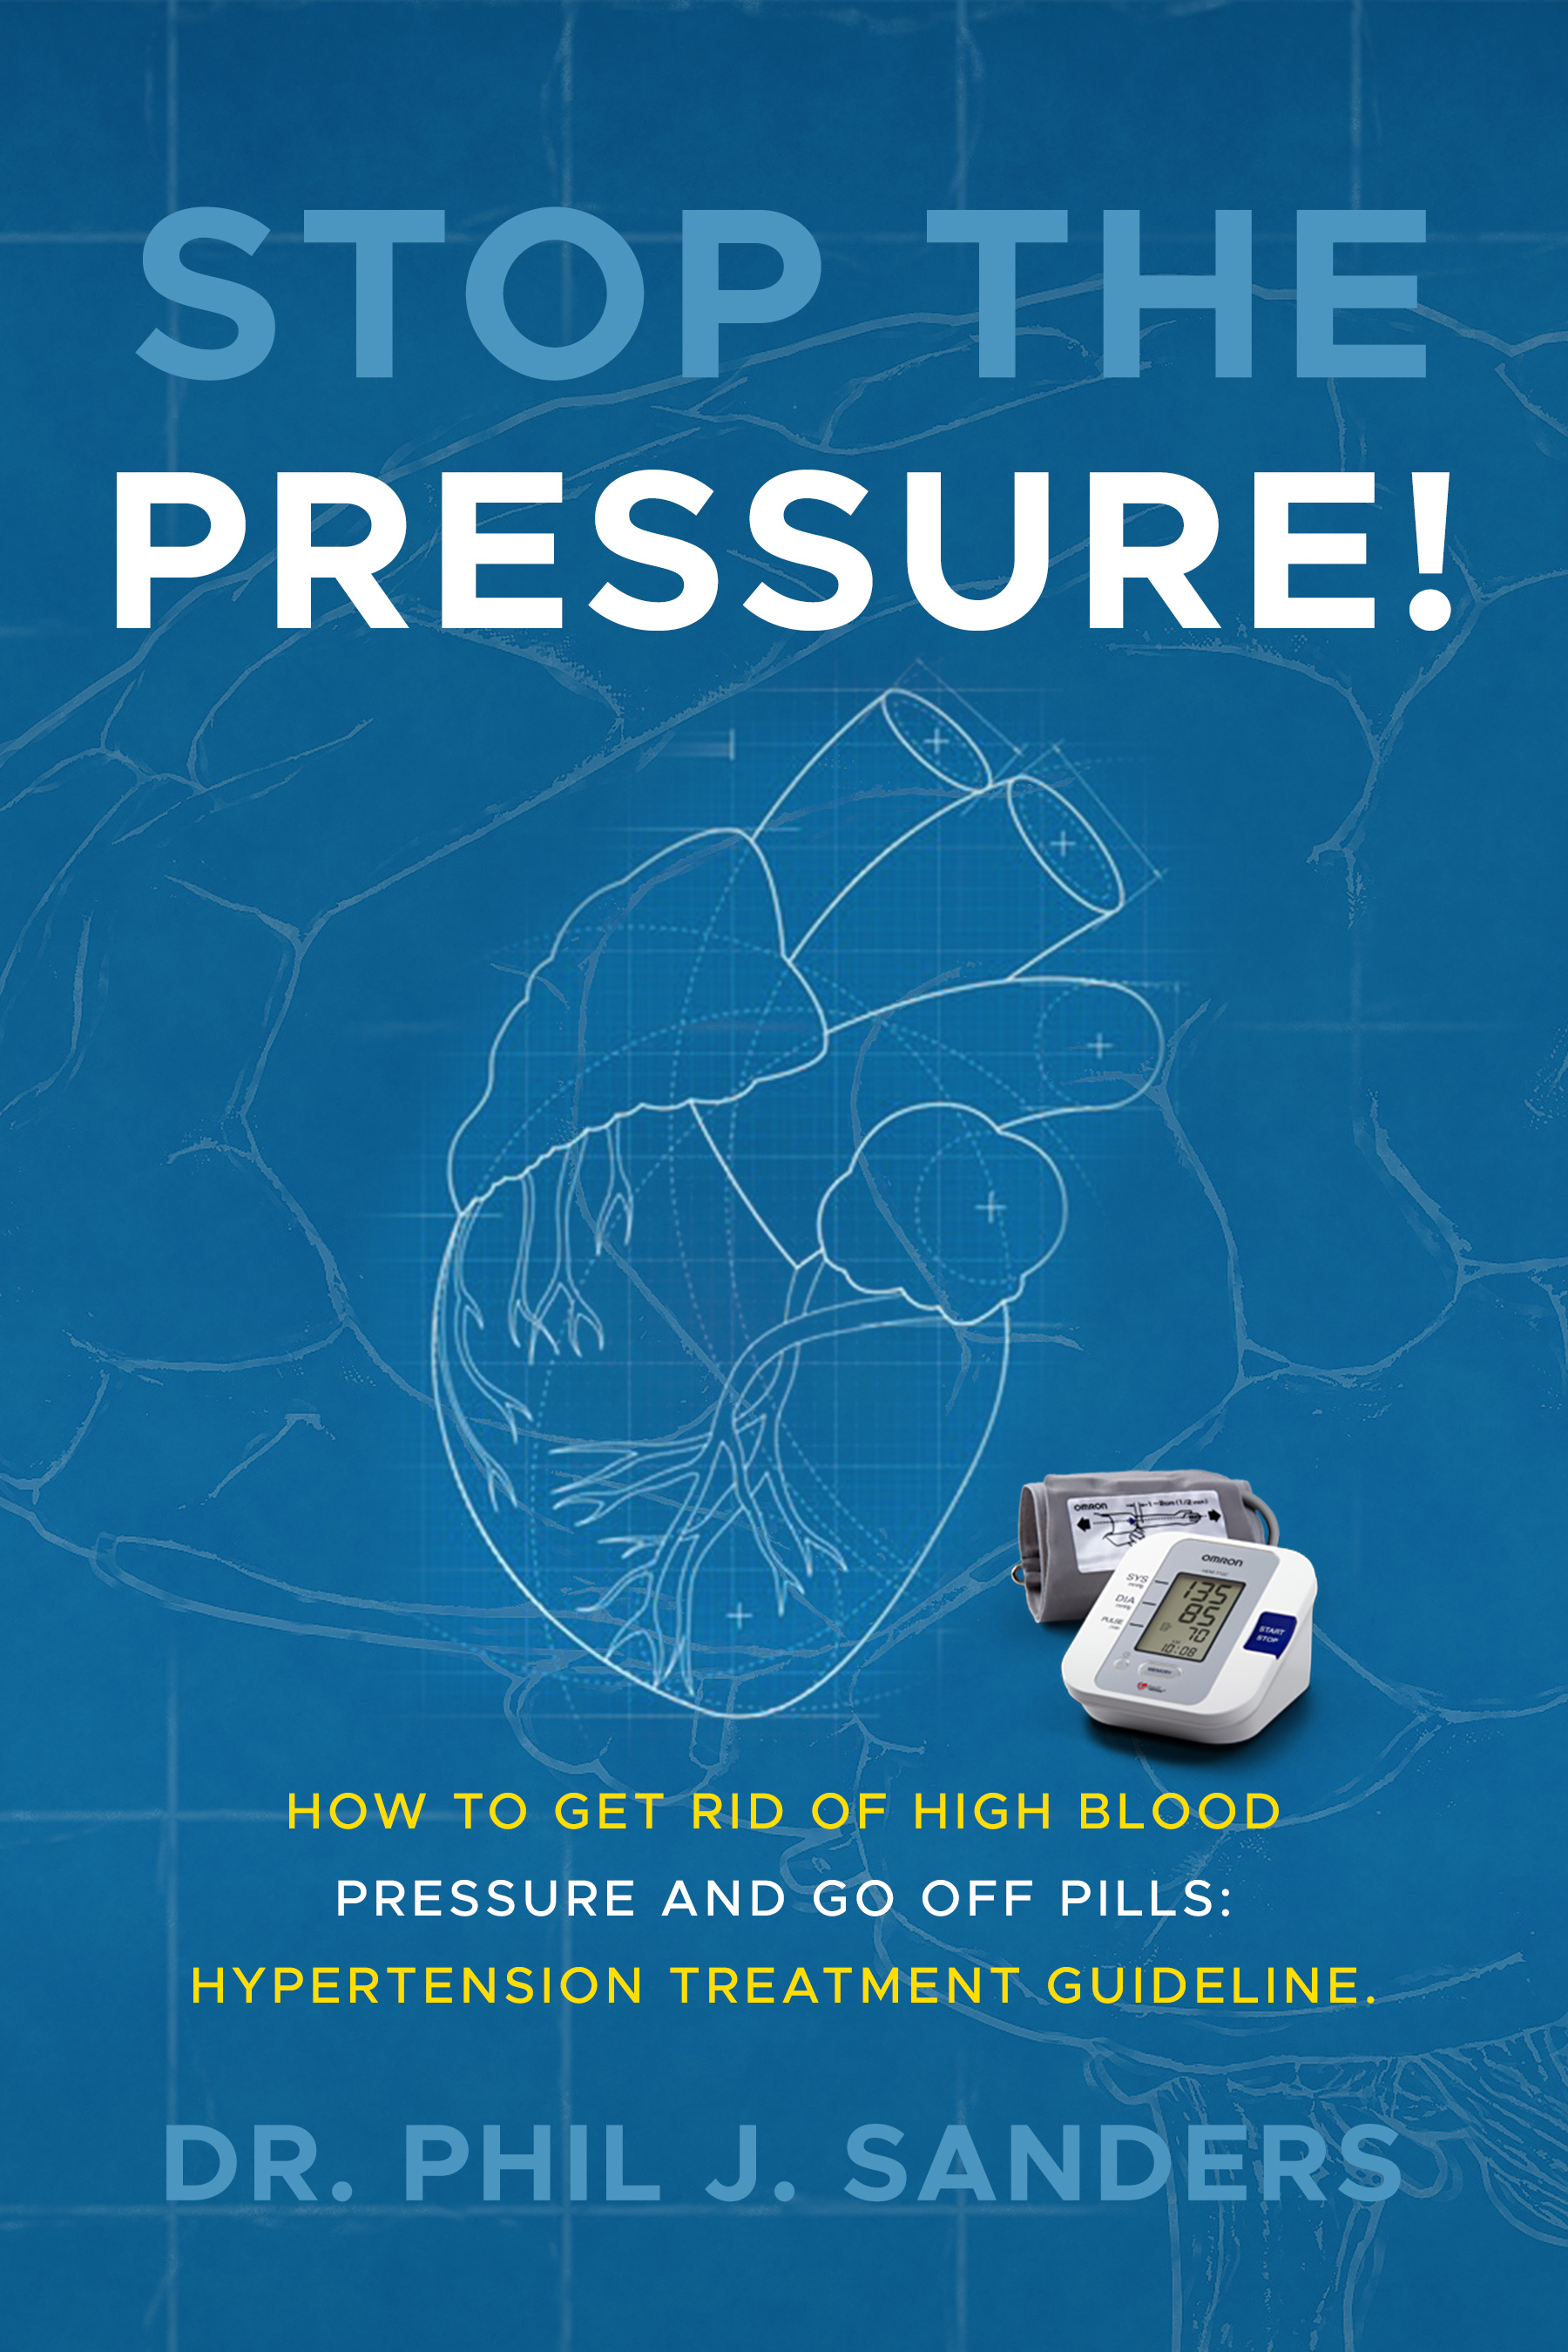 FREE: Stop the Pressure!: How to Get Rid of High Blood Pressure and Go off Pills: Hypertension Treatment Guideline. by Phil J. Sanders